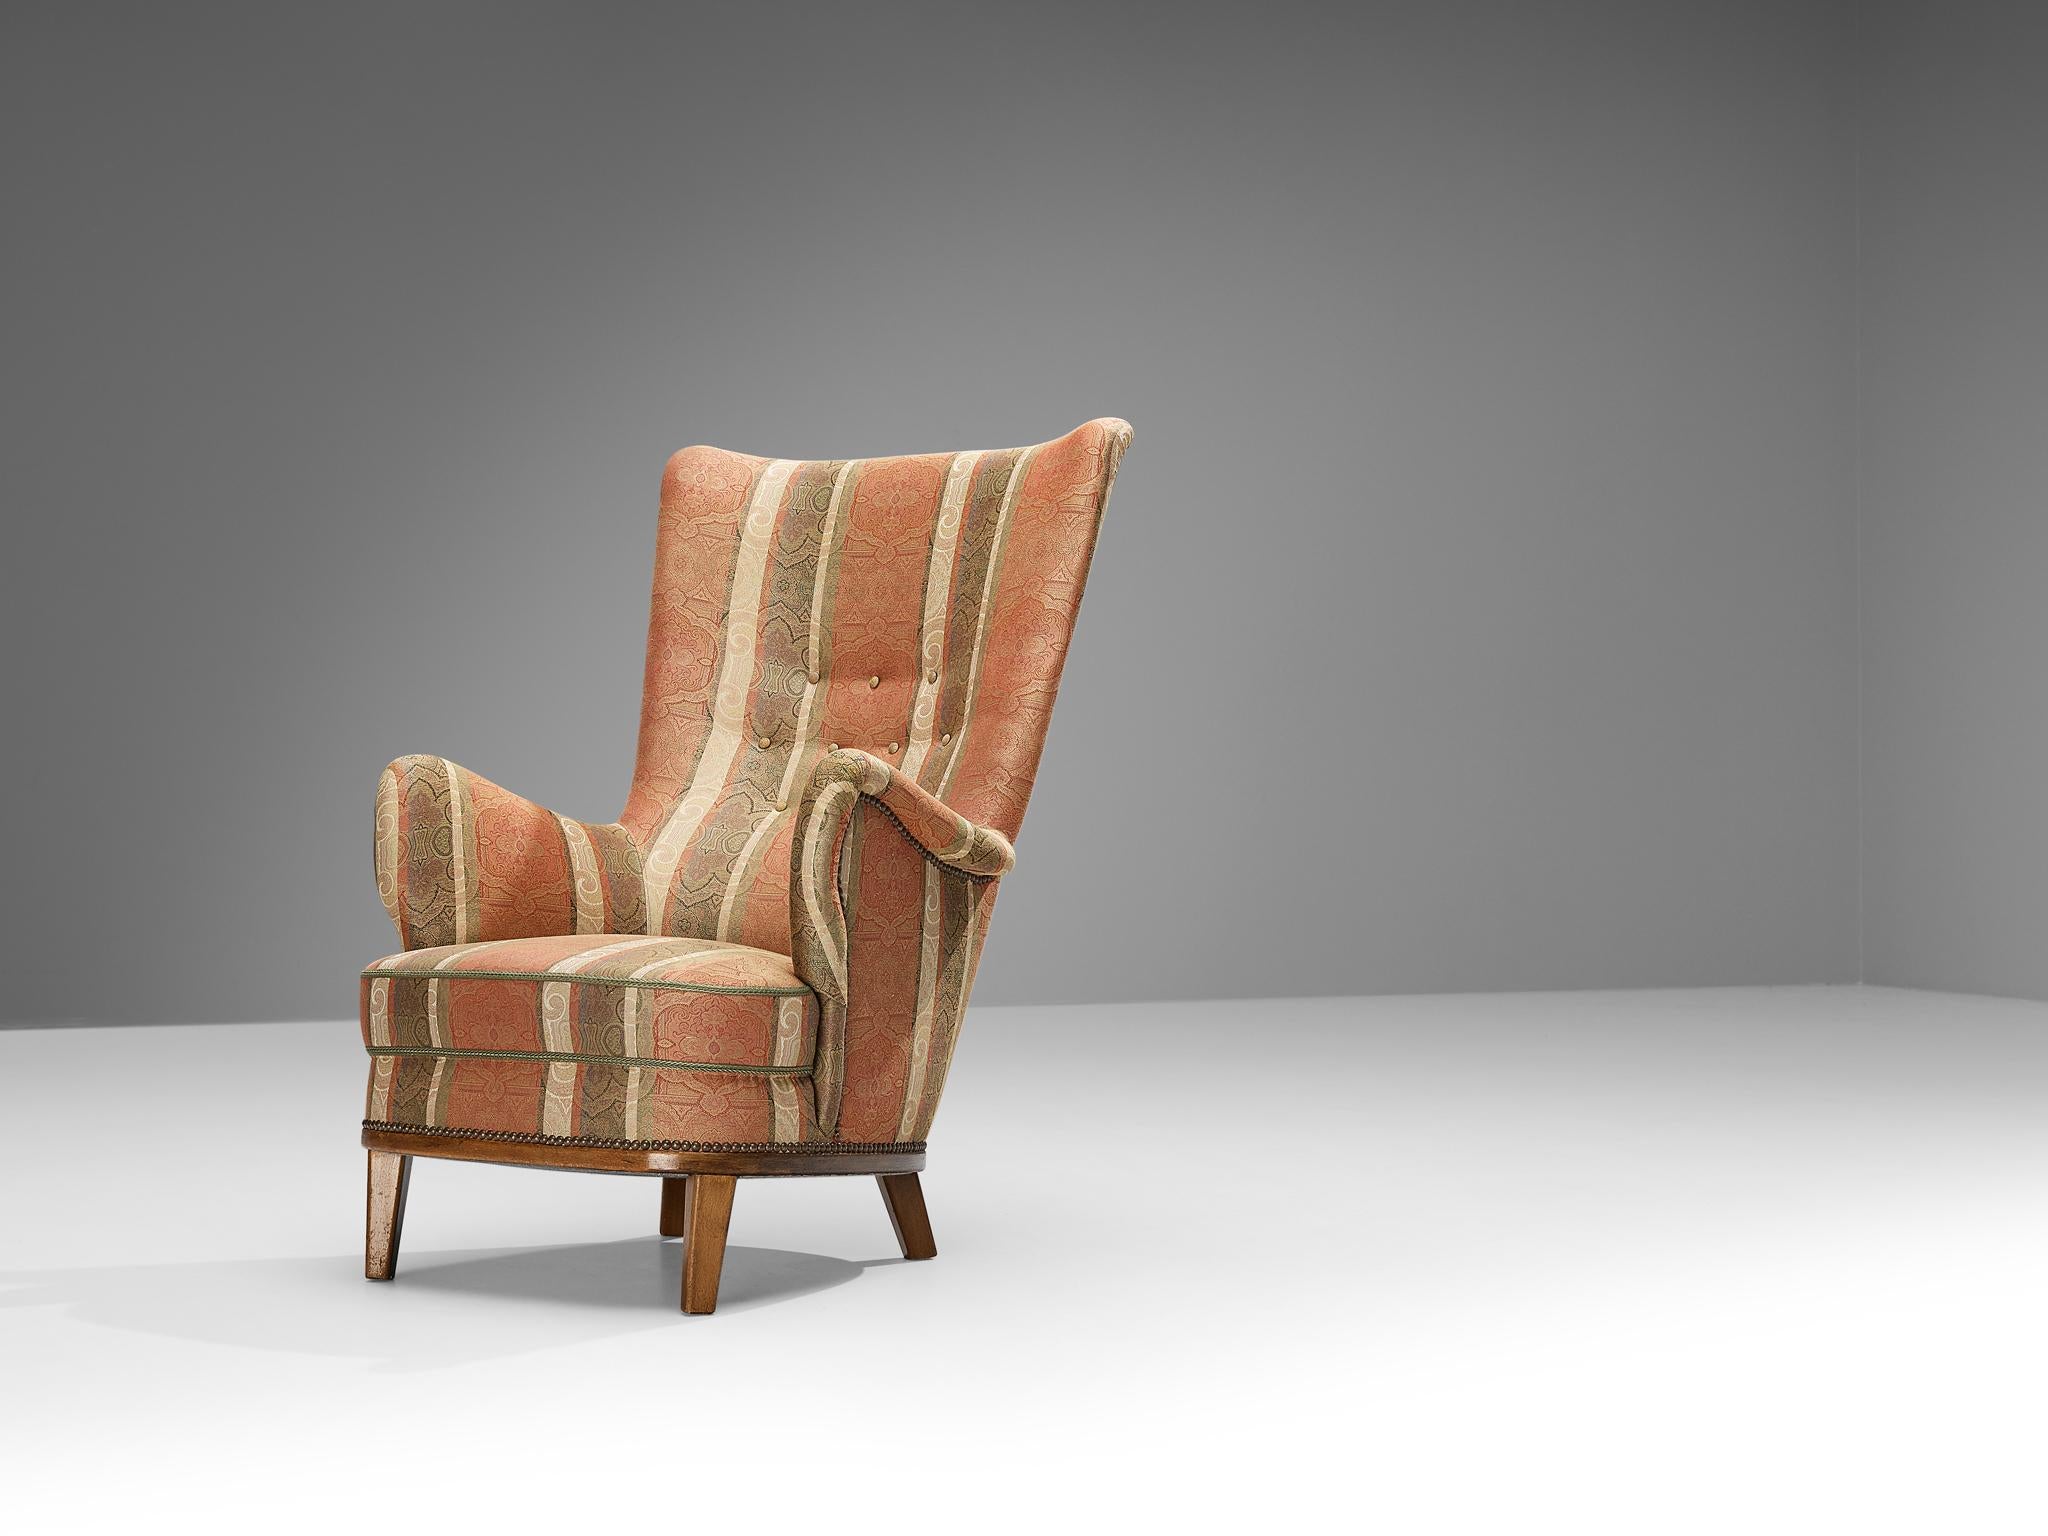 Charming Danish Easy Chair in Patterned Upholstery